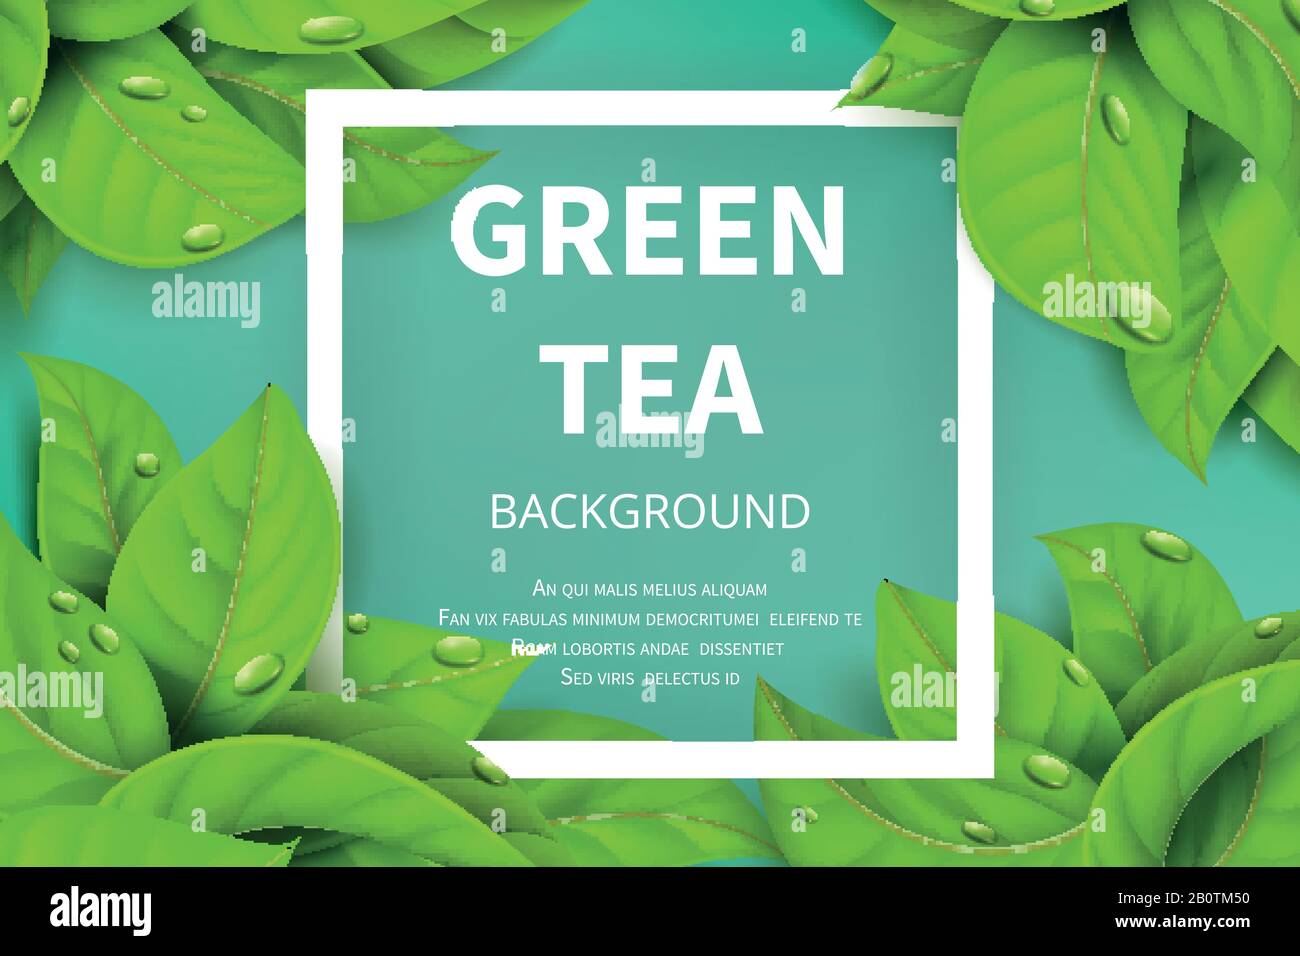 Green tea leaves vector nature background. Green tea background with leaf natural illustration Stock Vector